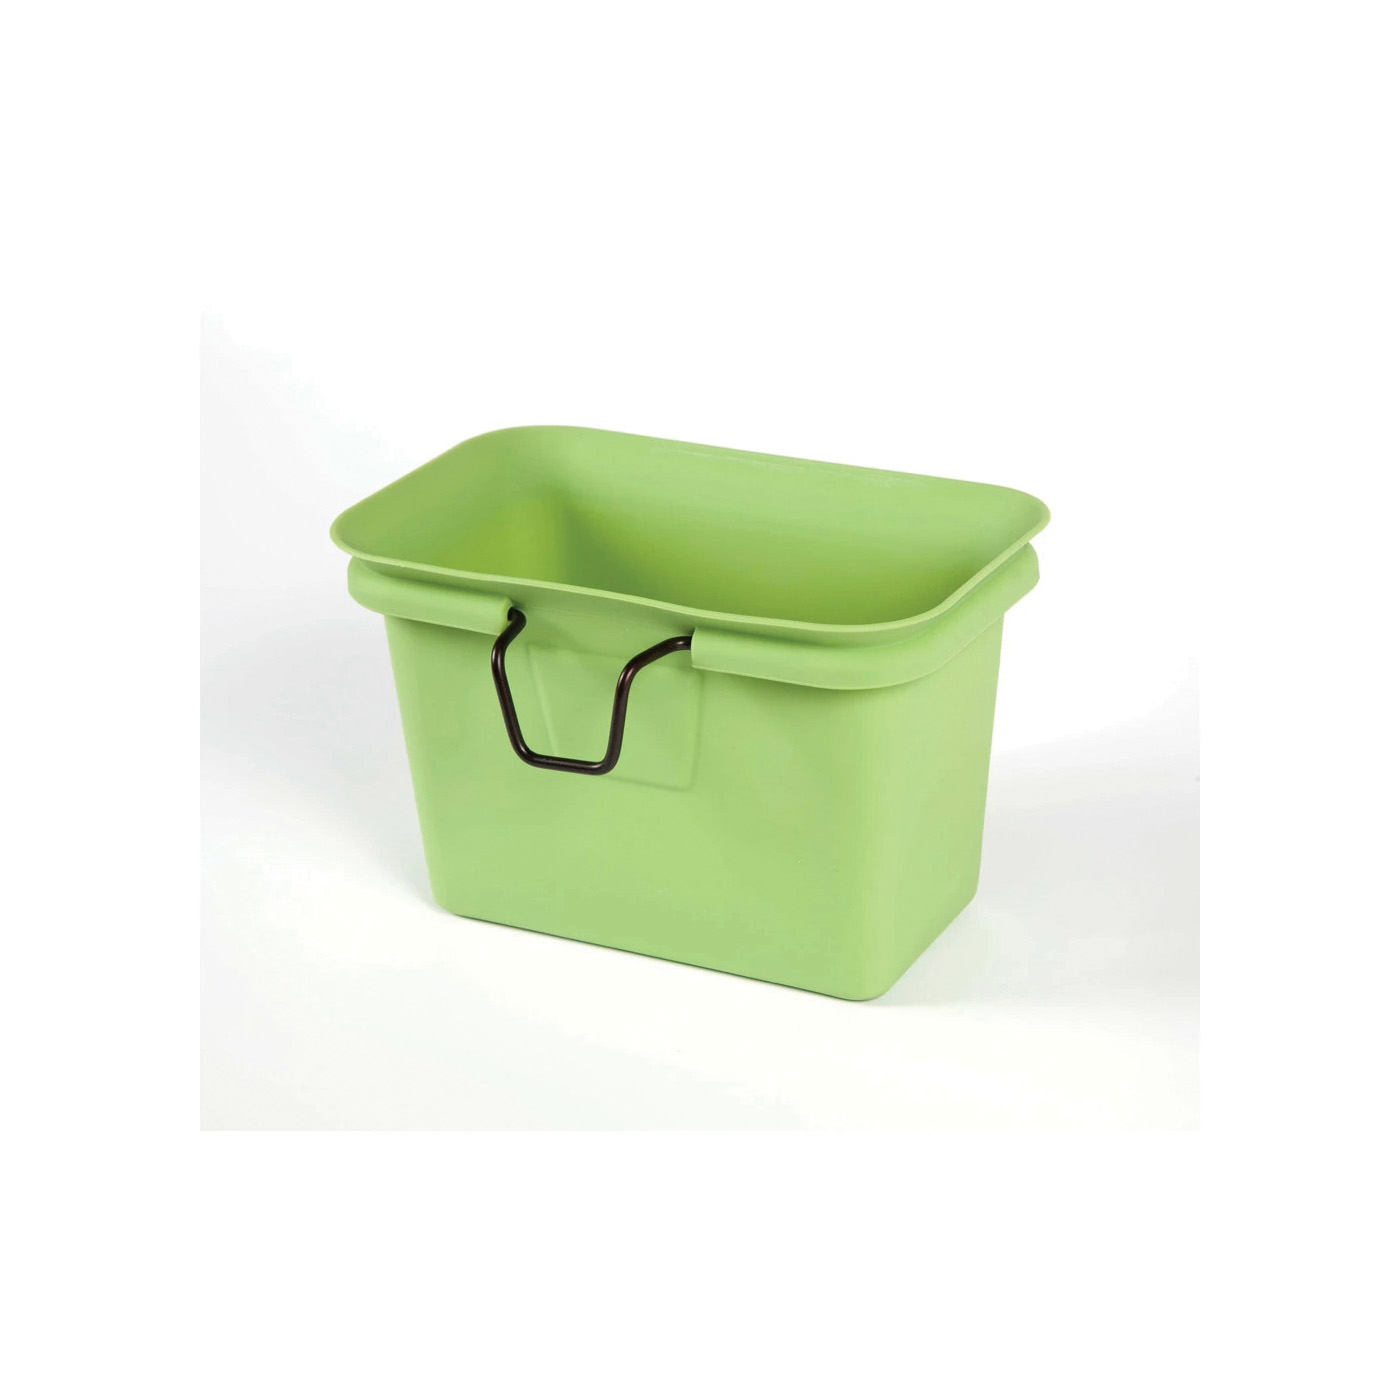 Full Circle FC11302-G Compost Collector, 0.6 gal Capacity, Silicone/Steel, Green, 5.2 in W, 8.27 in D, 5.51 in H - 1